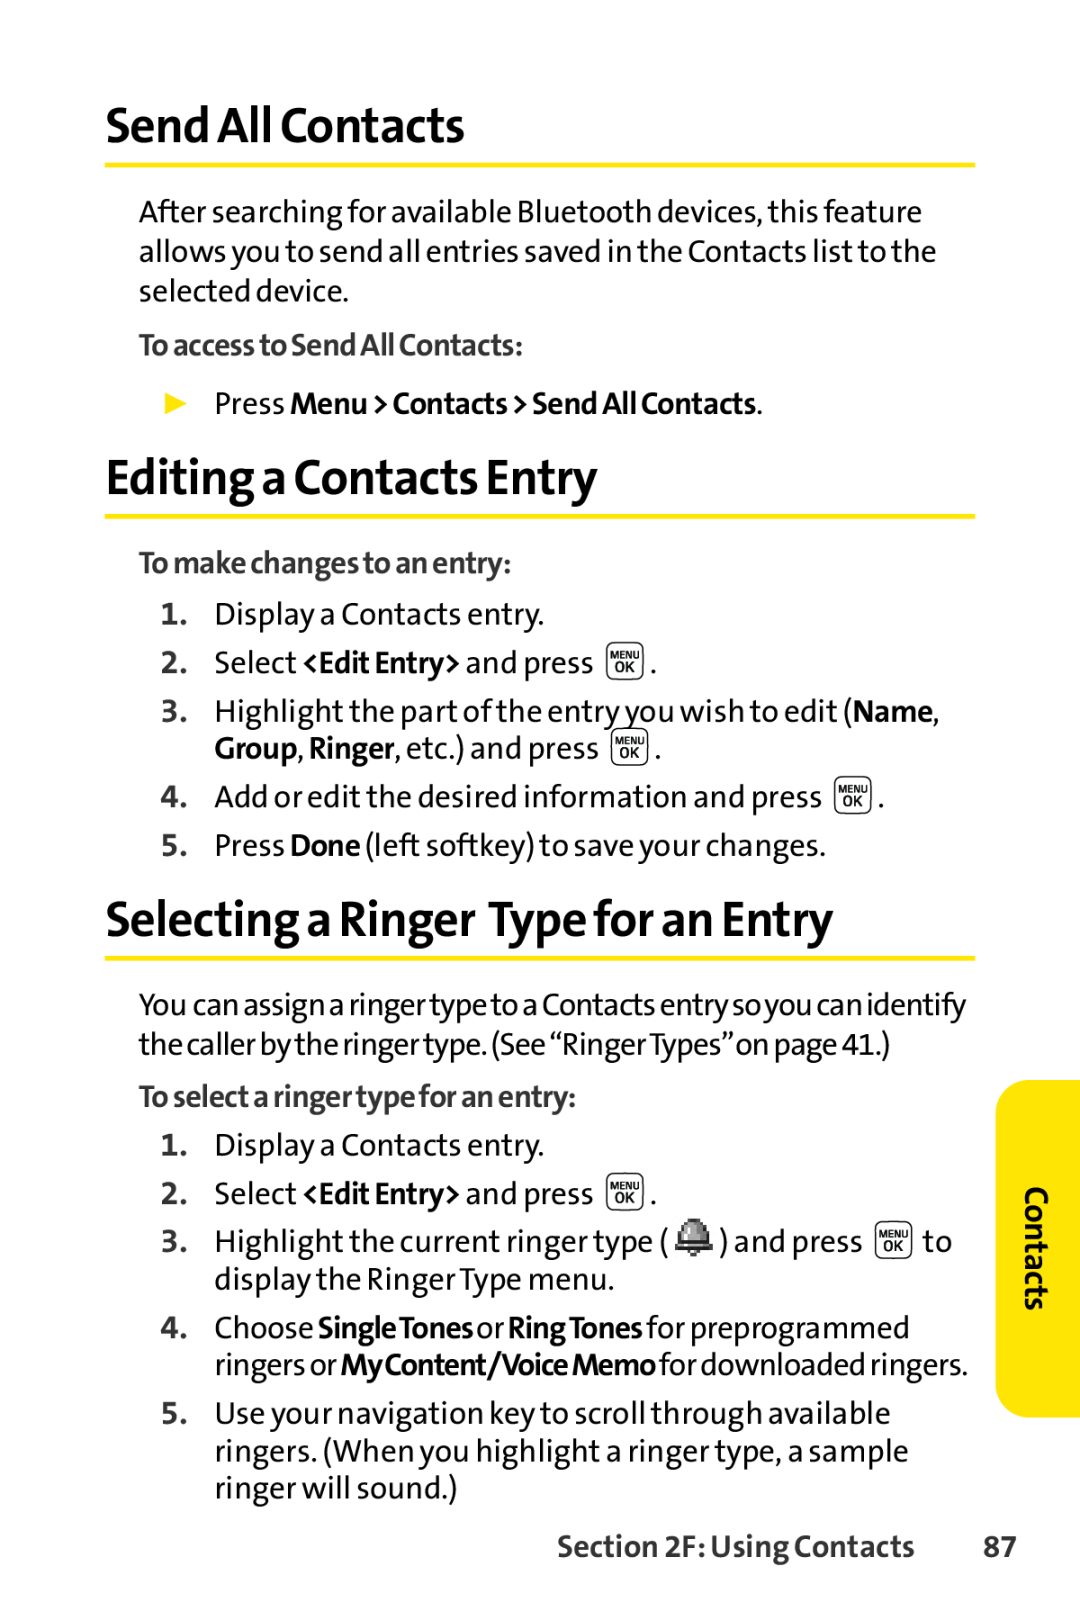 Sprint Nextel LX160 manual Send All Contacts, Editinga Contacts Entry, Selecting a Ringer Type for an Entry 